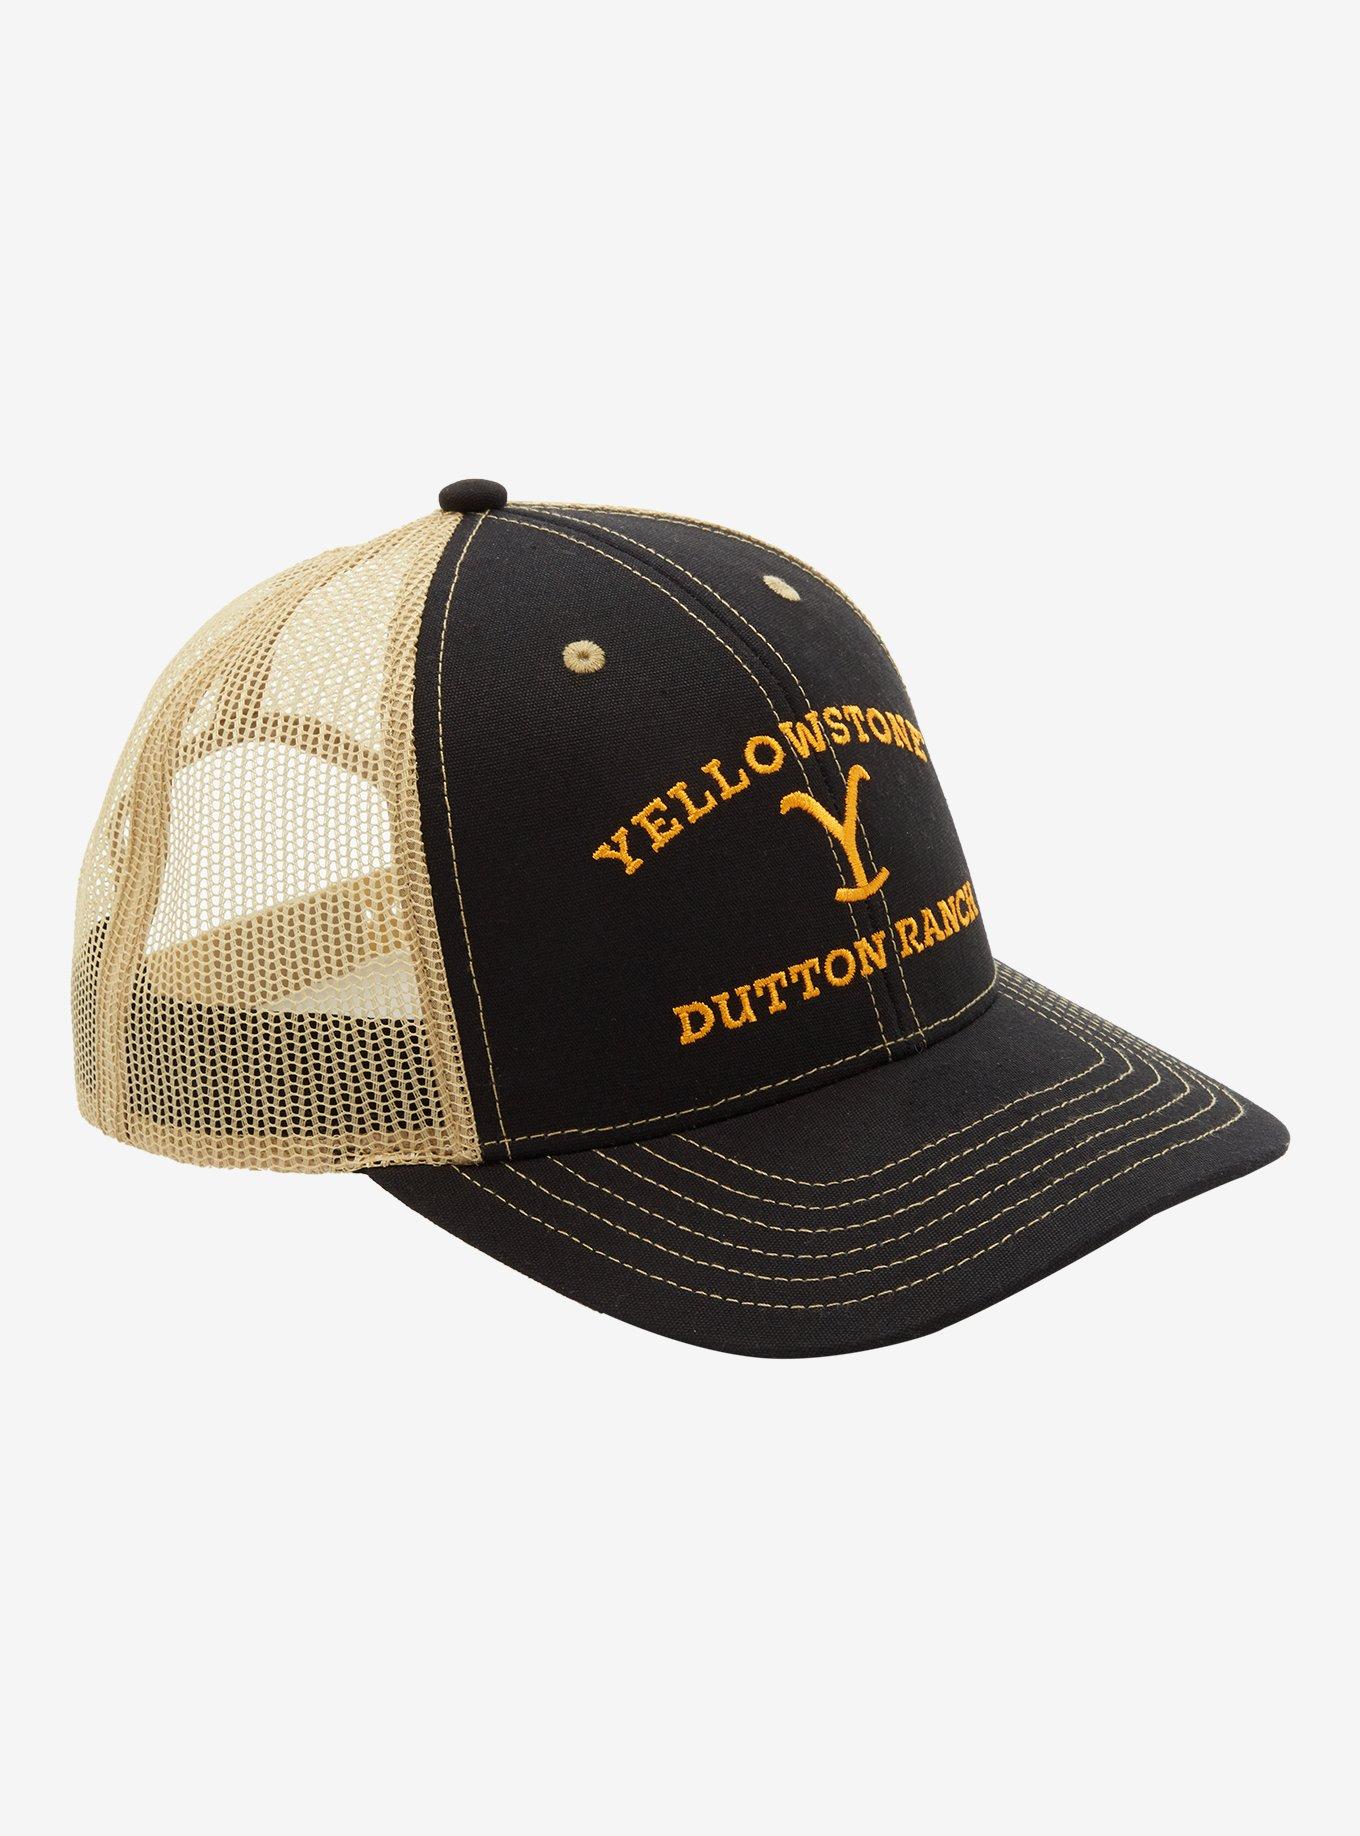 Dutton Hat Yellowstone | Embroidered Trucker Ranch Hot Topic Logo